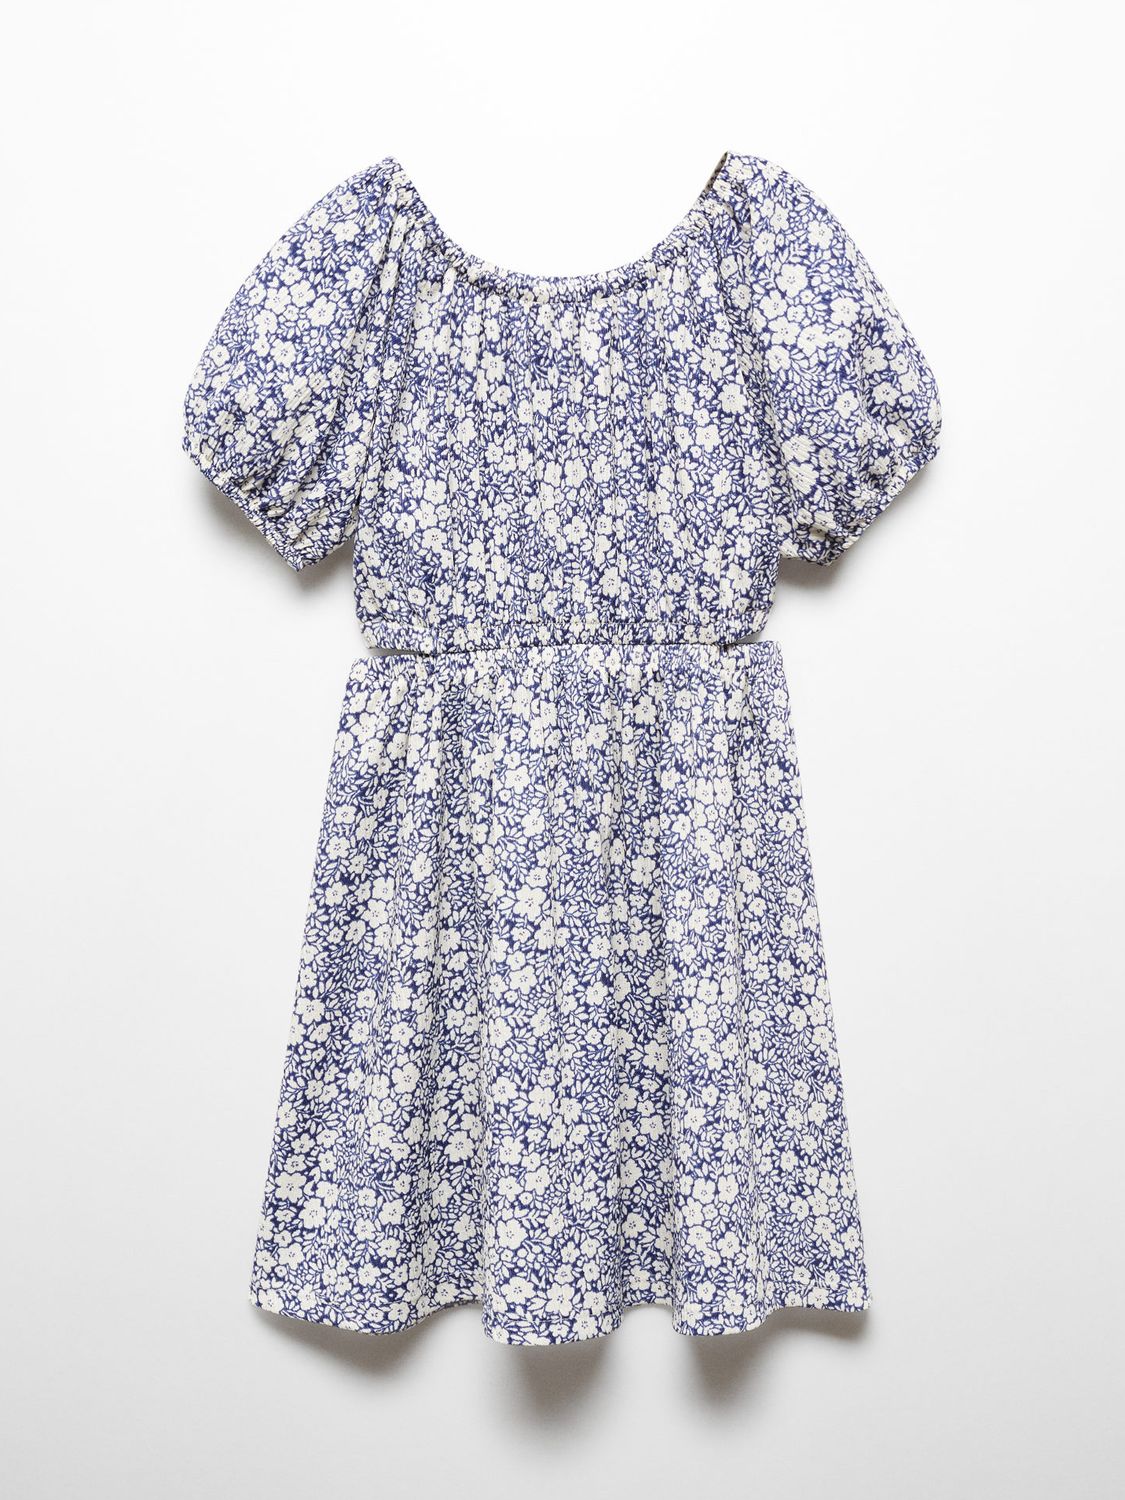 Buy Mango Kids' Alexia Floral Cut Out Dress, Navy/White Online at johnlewis.com